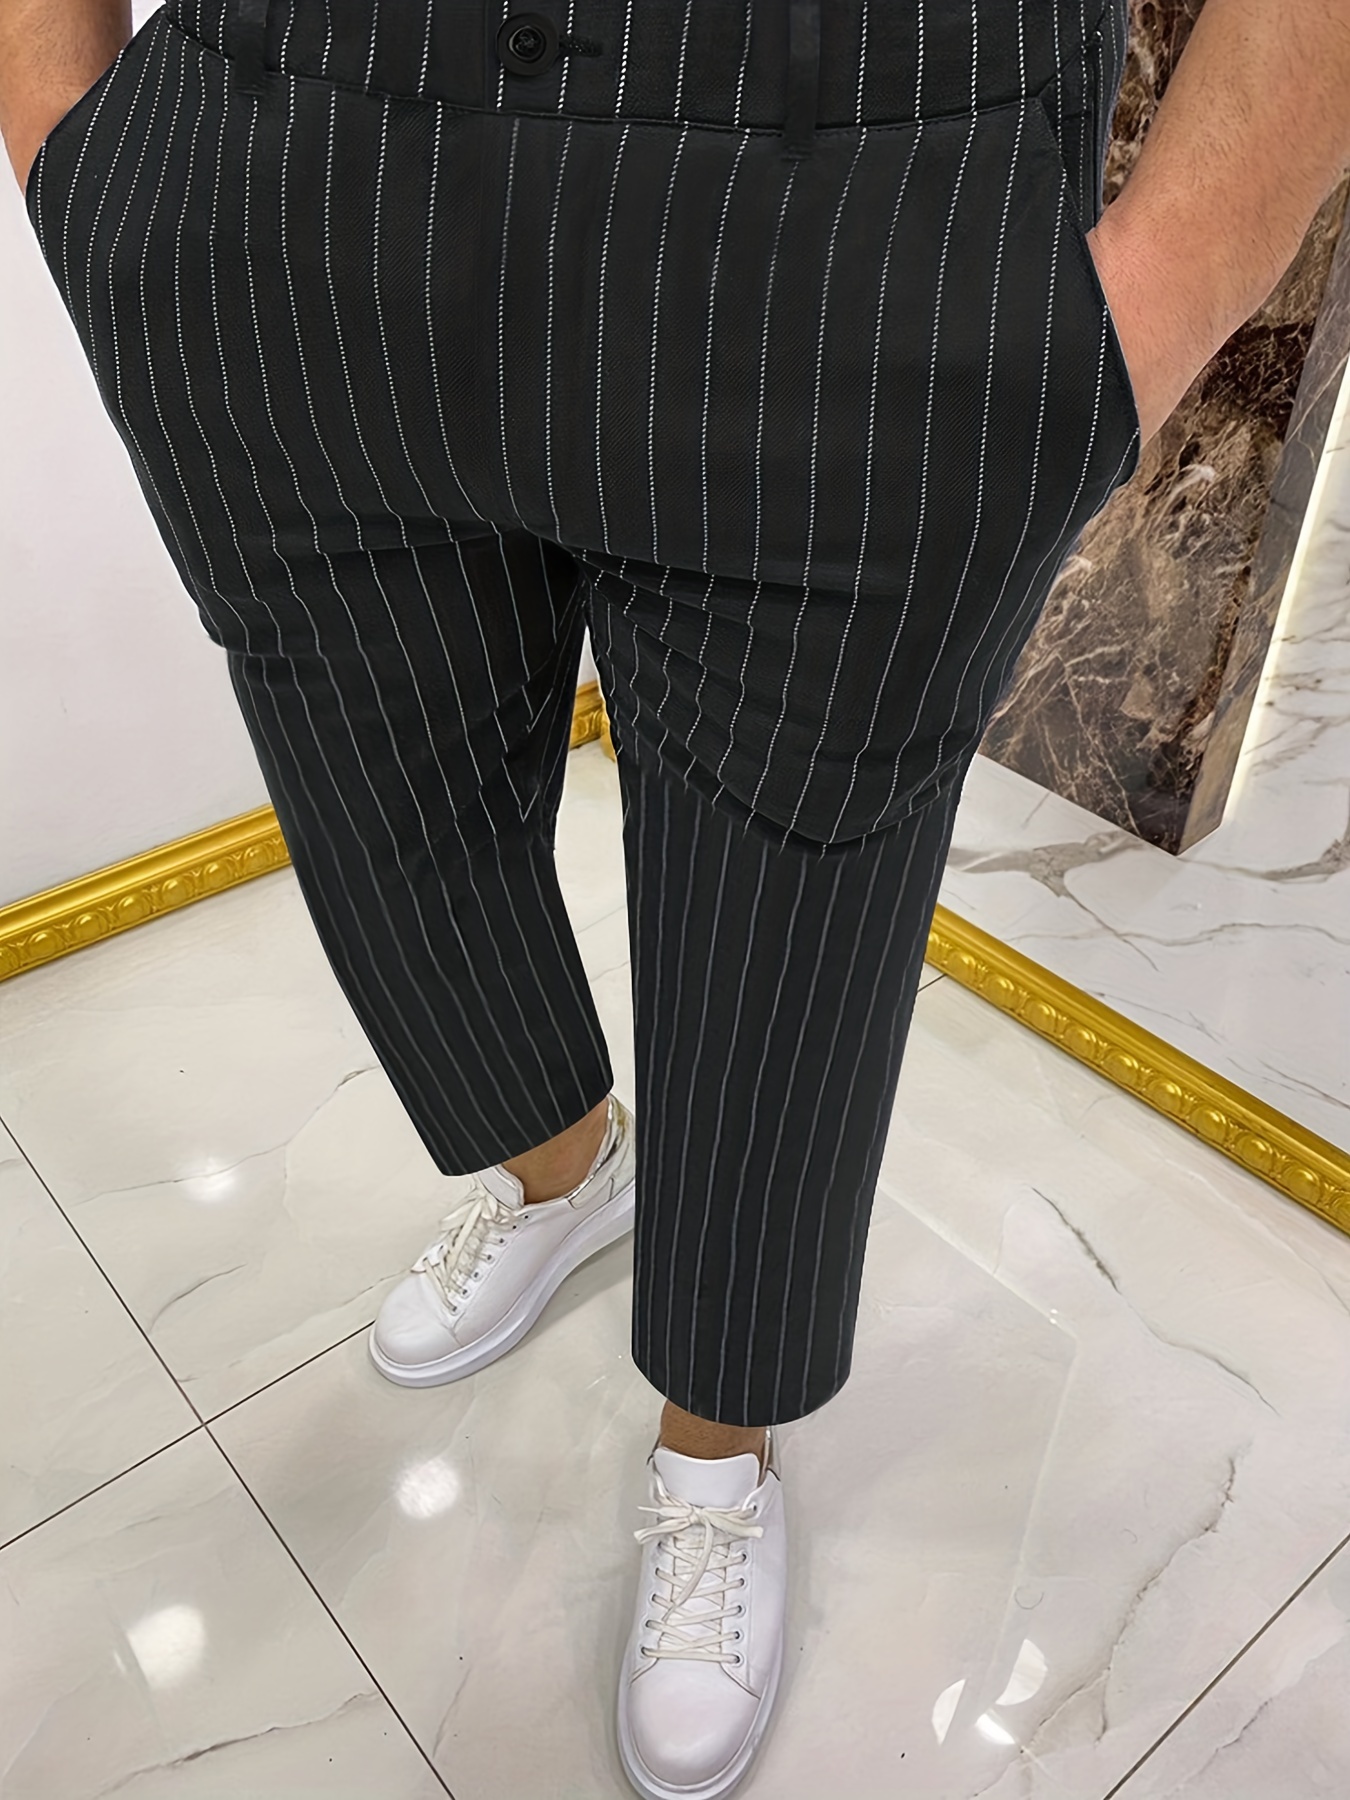 Men's Dark Striped Slim Cropped Pants Business Work Formal Stretch Suit  Trousers